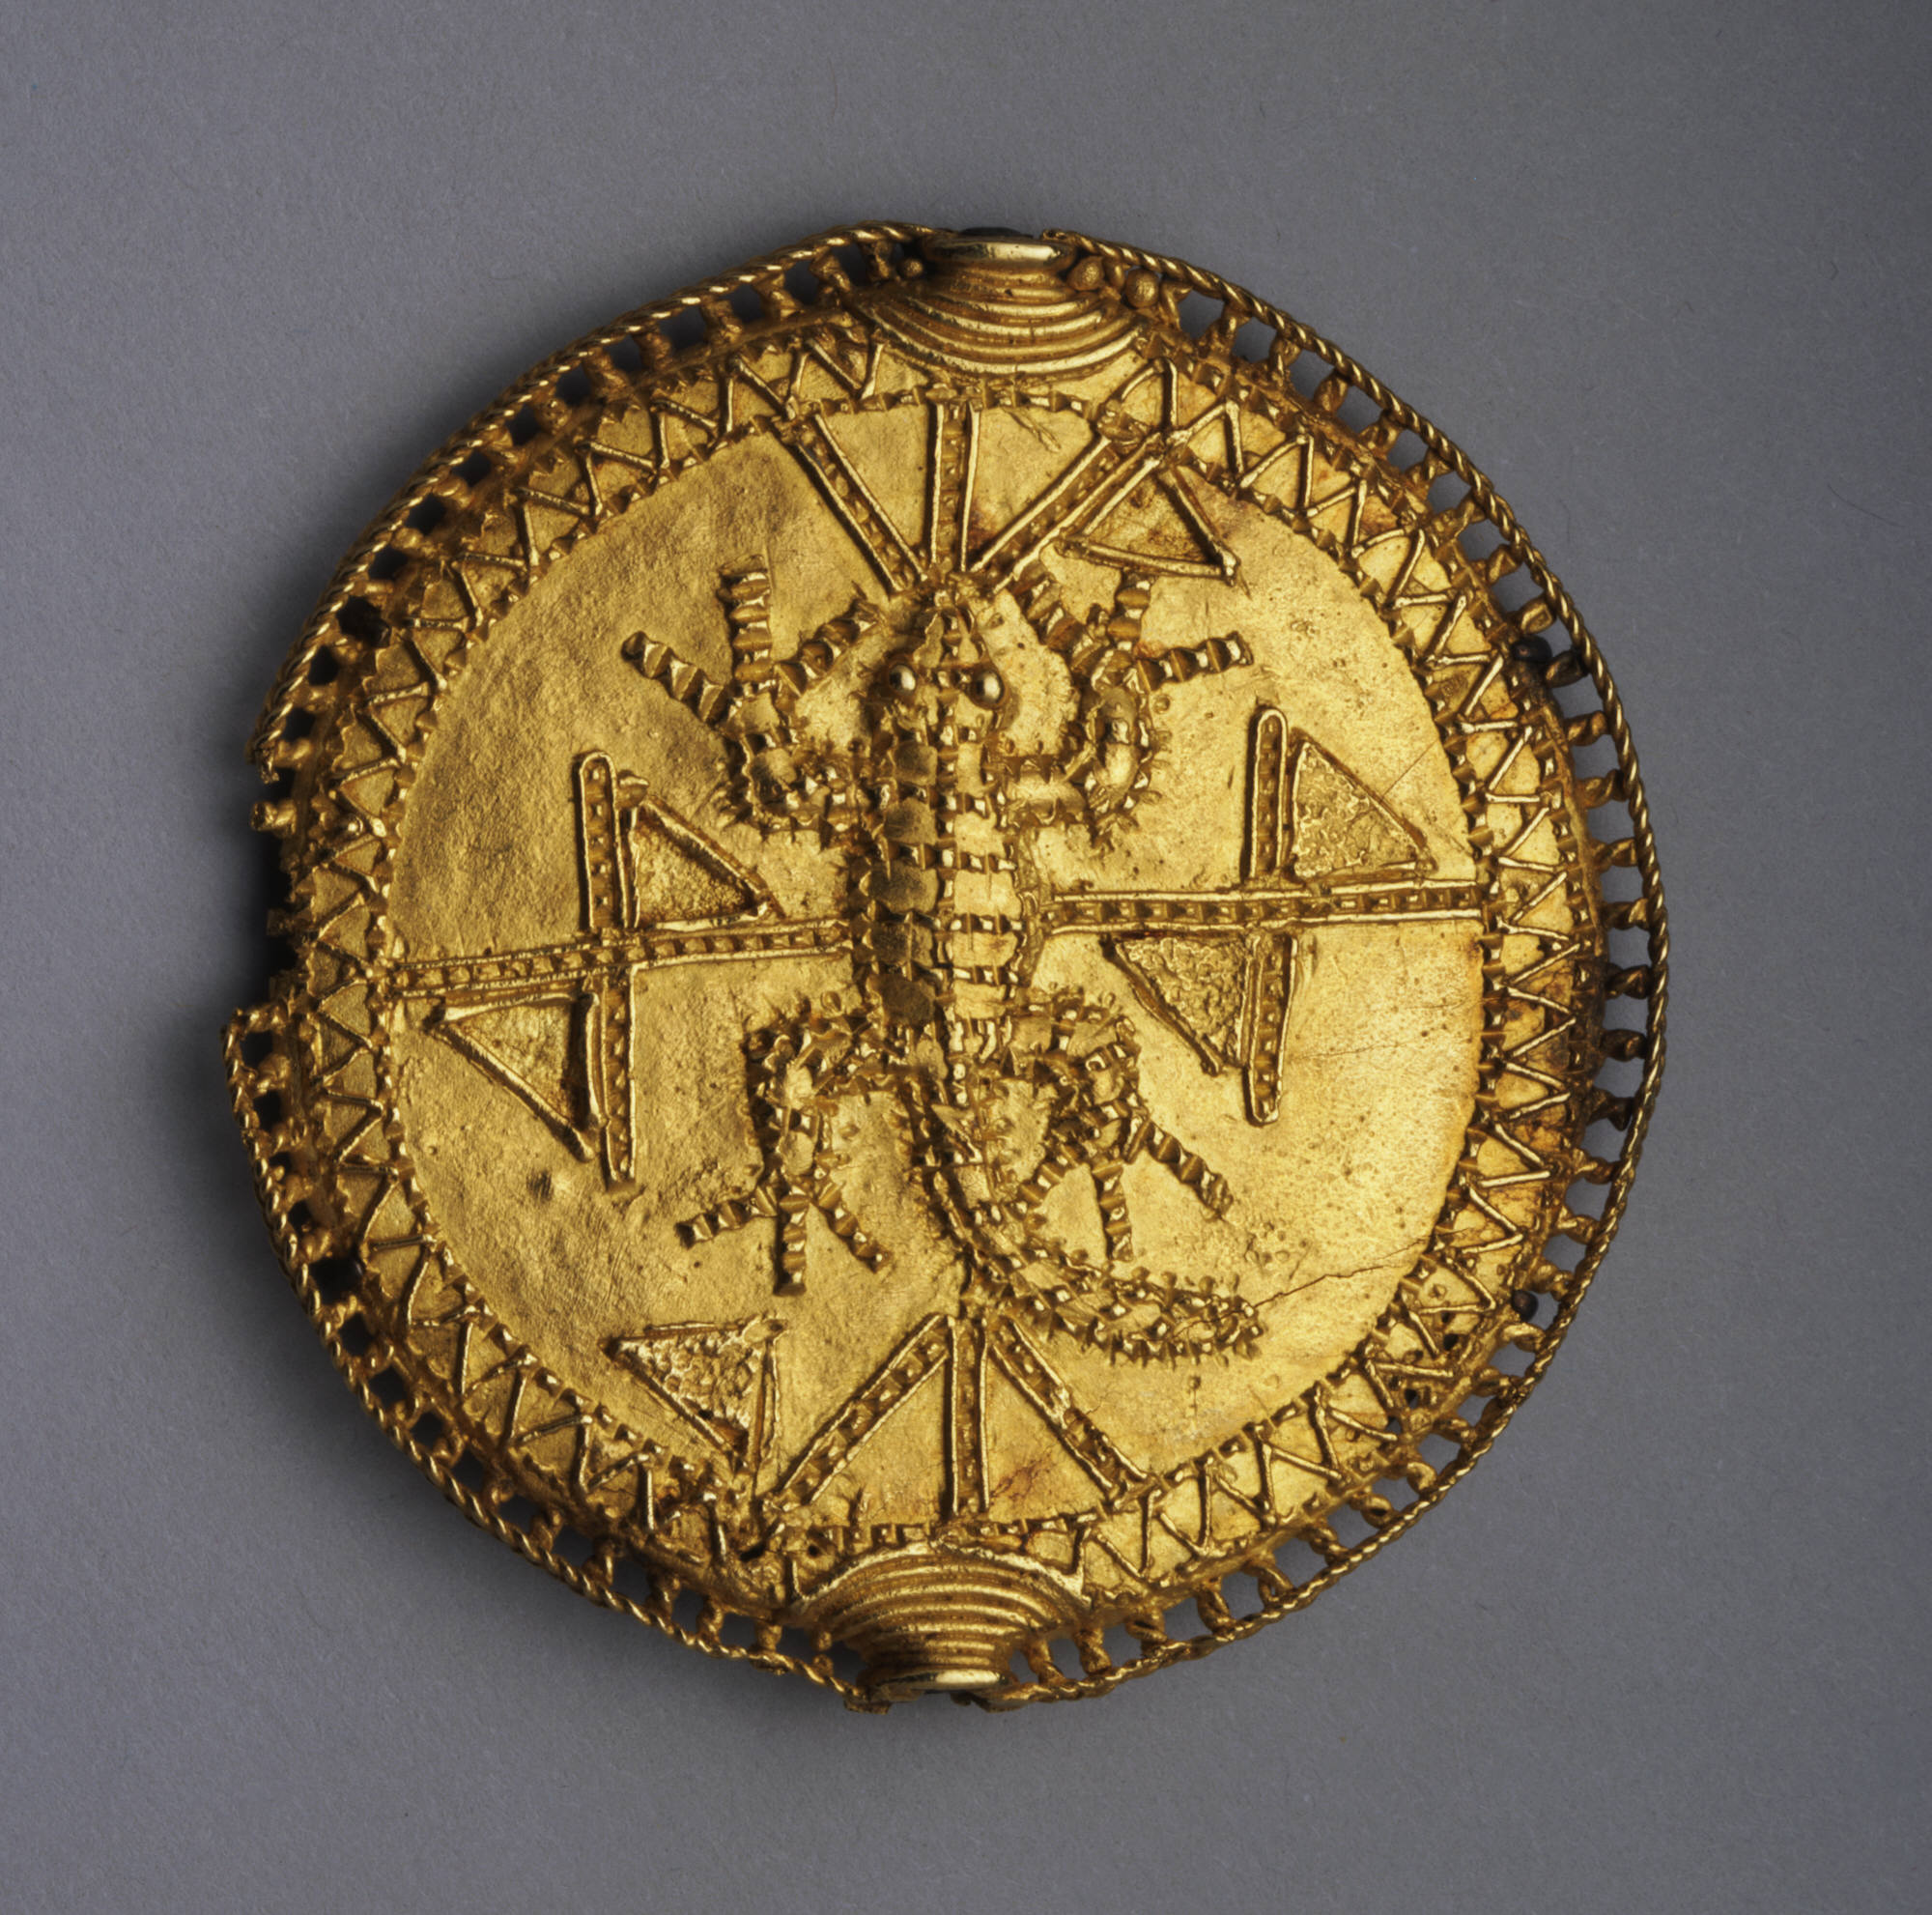 West Africa, Ghana. Akan (Asante) artist: Disk pendant or pectoral badge (akrafokɔnmu), late 19th century. Gold, diam. 7.2 cm. Museum purchase, Fowler McCormick, Class of 1921, Fund (y1982-17). Photo: Bruce M. White